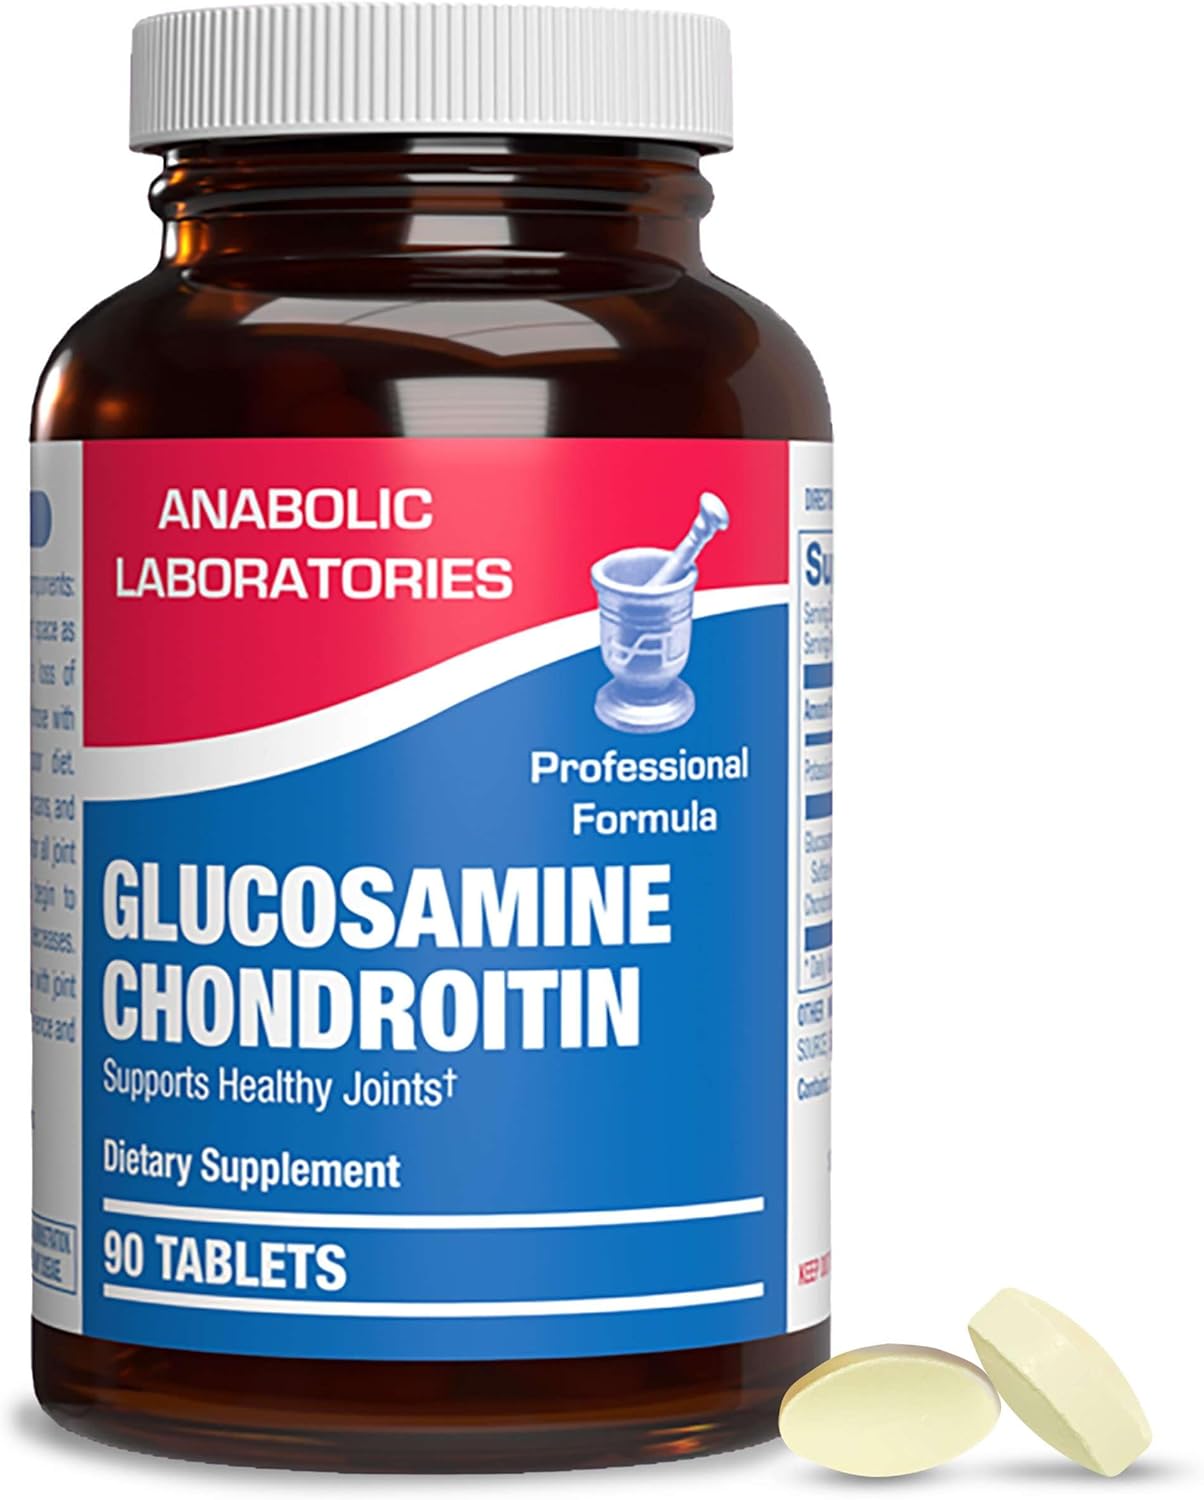 Anabolic Laboratories Glucosamine Chondroitin Tablets - 180 Nutritional Supplements for Joint Health - Contains 500 mg Glucosamine Sulfate Potassium Chloride and 40 mg Chondroitin Sulfate